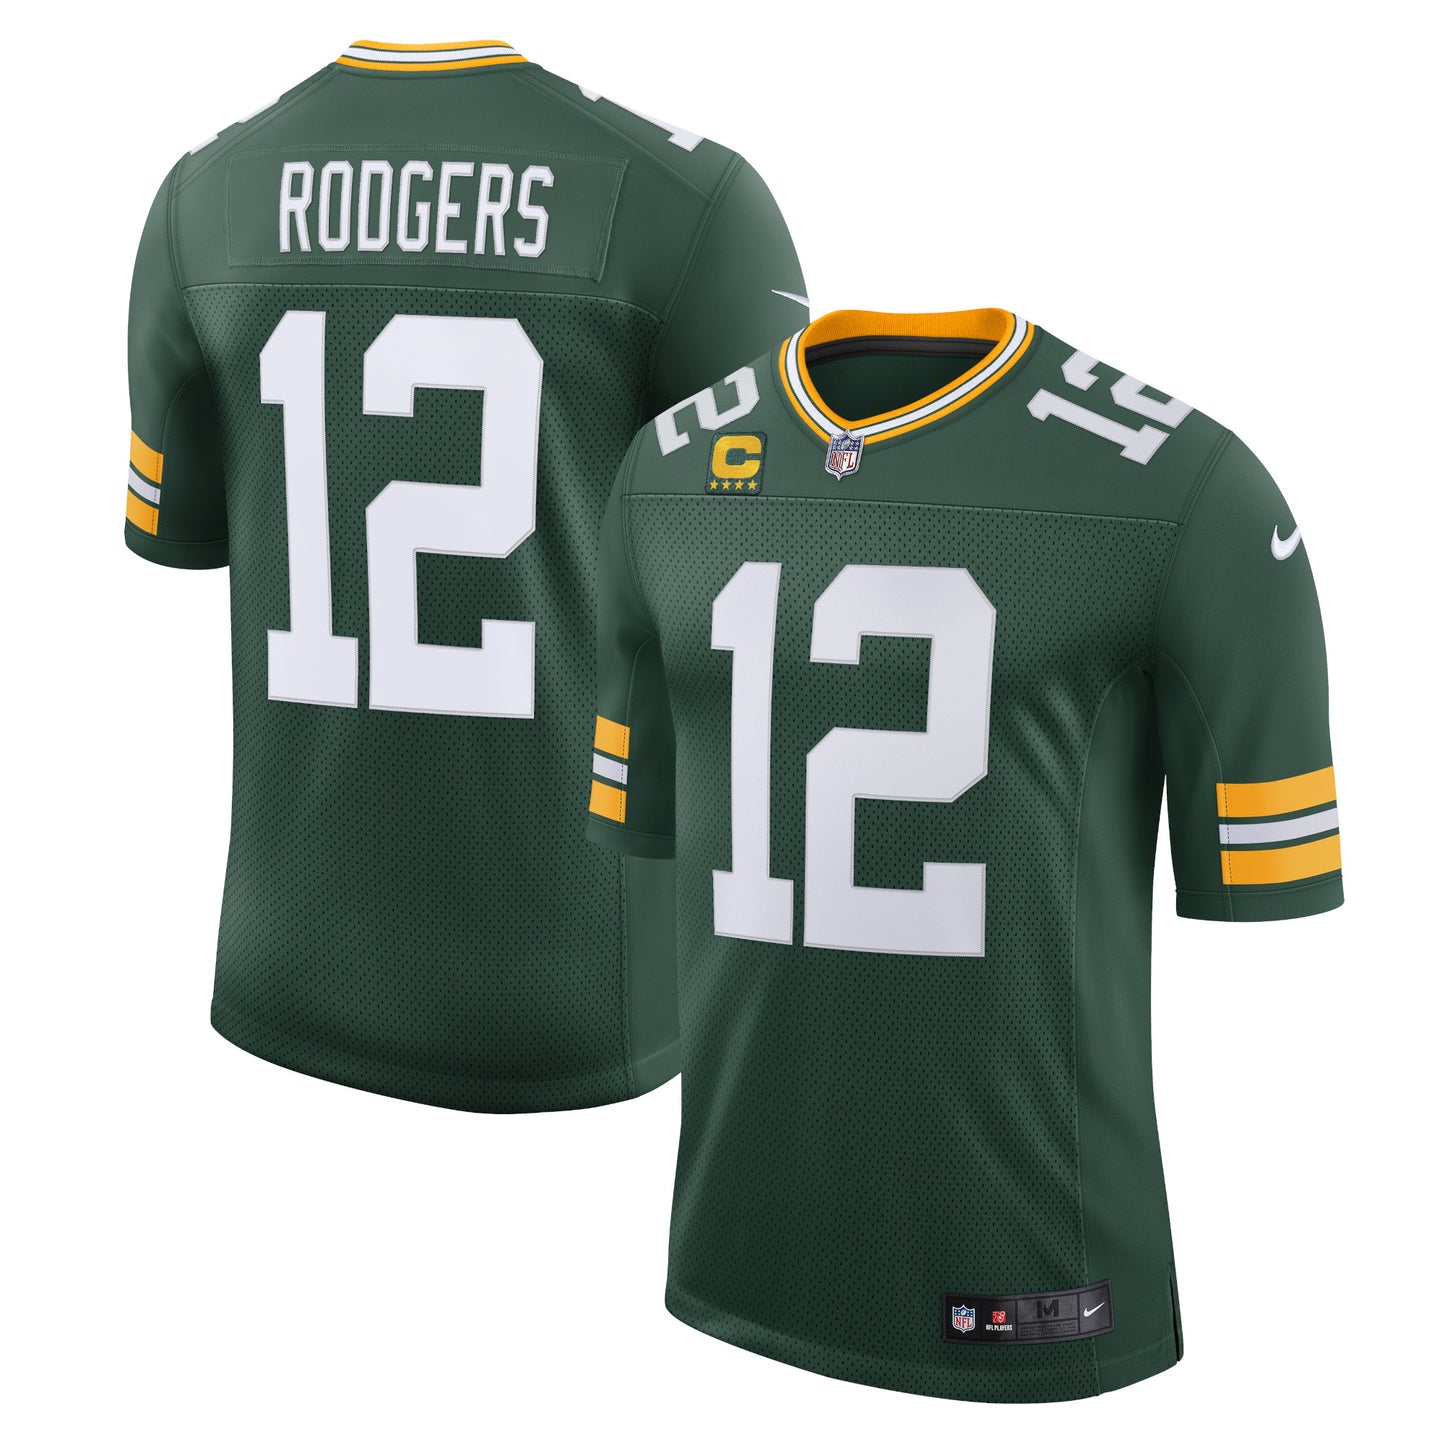 Aaron Rodgers Green Bay Packers Nike Captain Vapor Limited Jersey - Green